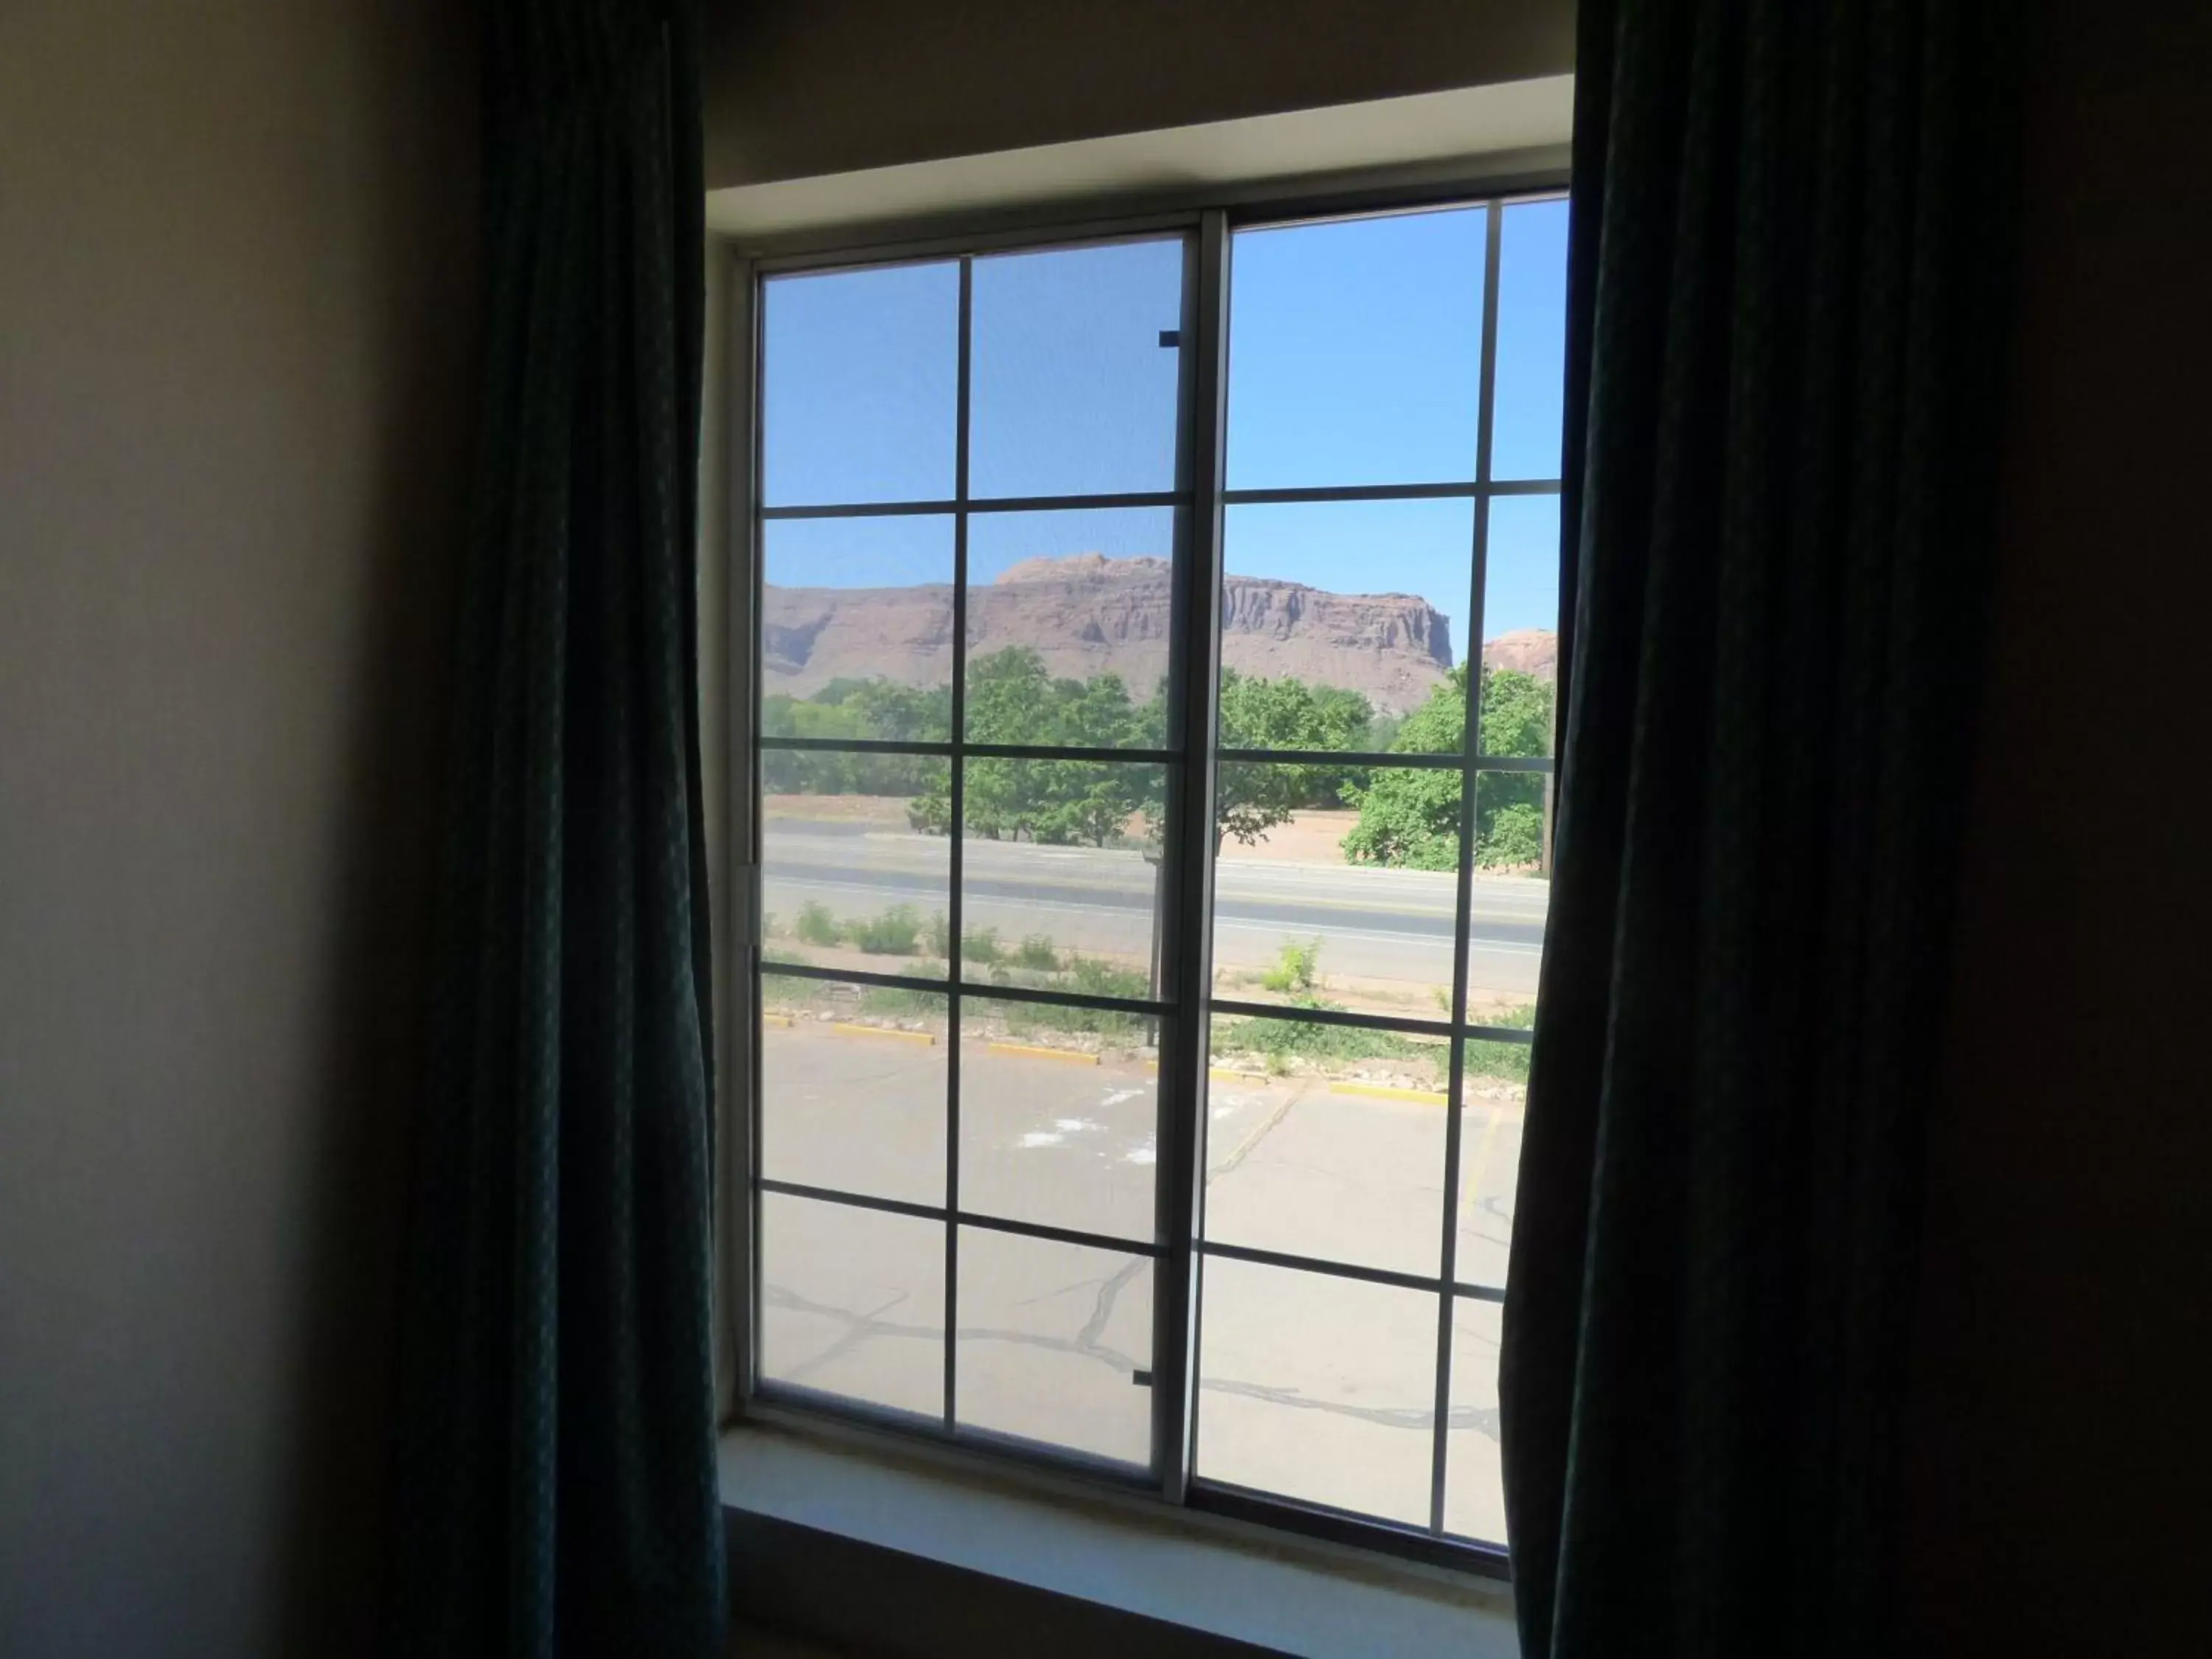 Mountain view in Moab Gateway Inn at Arches Nat'l Park